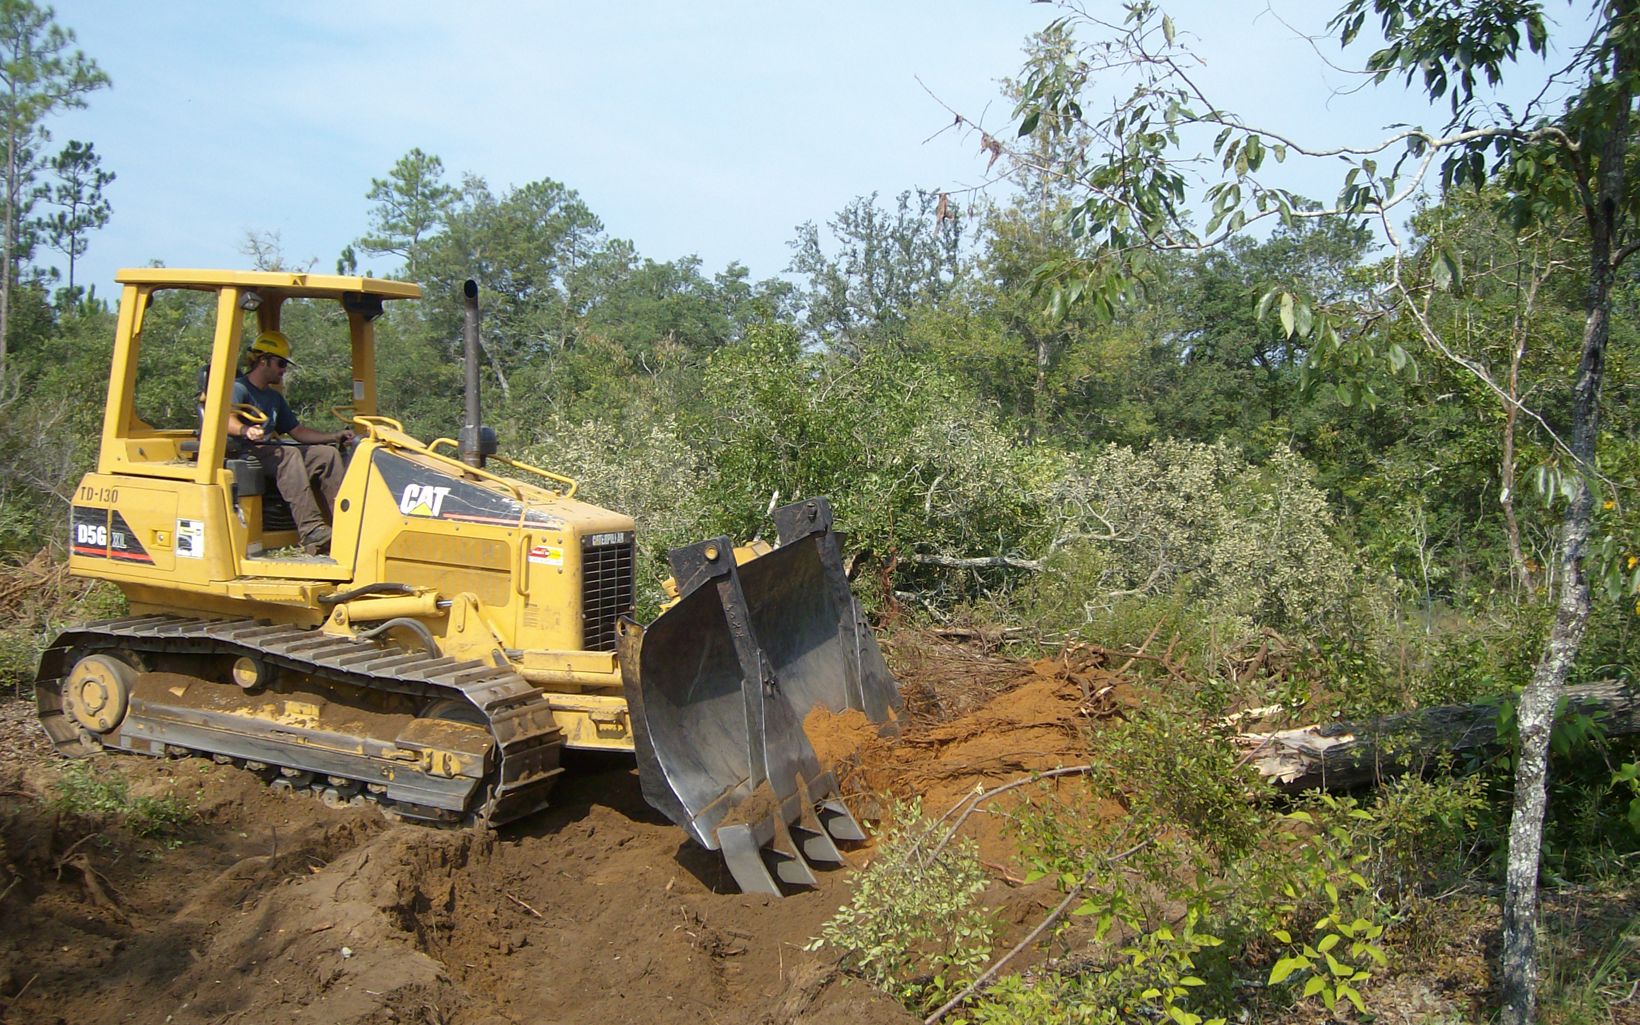 Heavy equipment is used to remove windrow (vegetation on the ground) prior to groundcover restoration at Apalachicola Bluffs and Ravines Preserve.